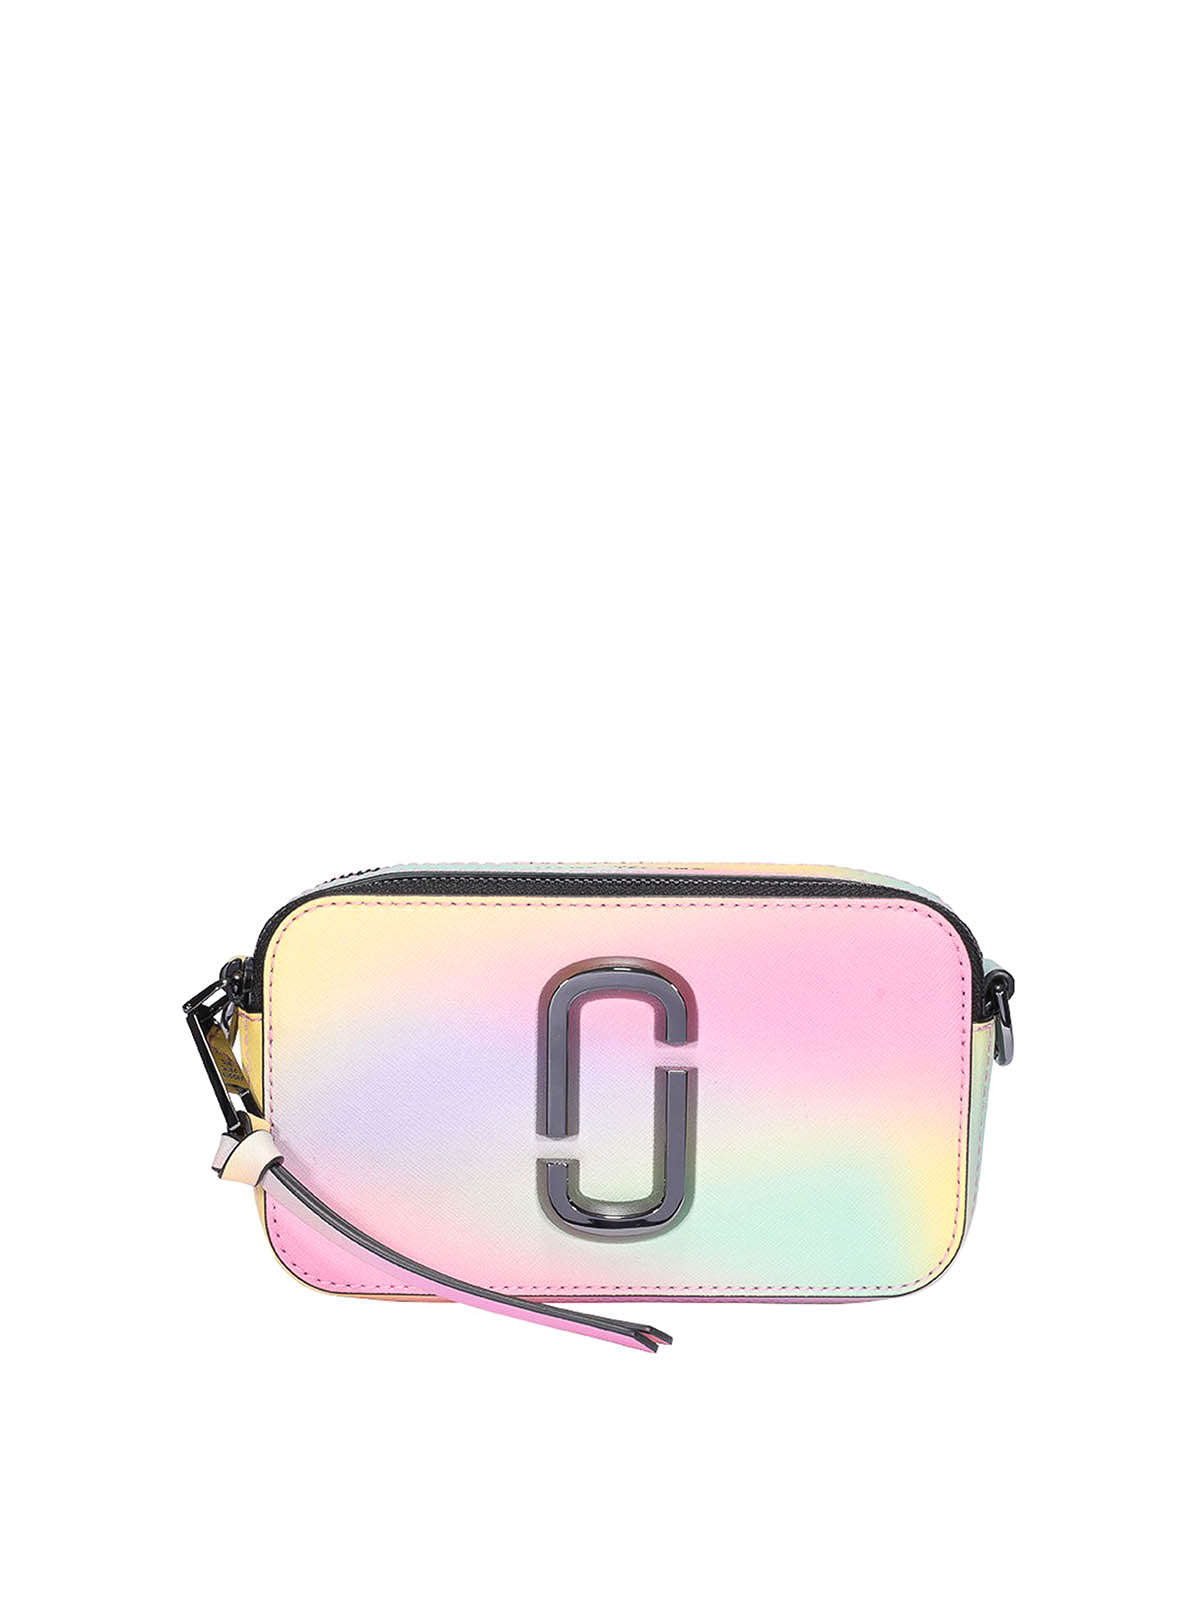 The Snapshot Airbrushed Bag by Marc Jacobs Handbags for $73